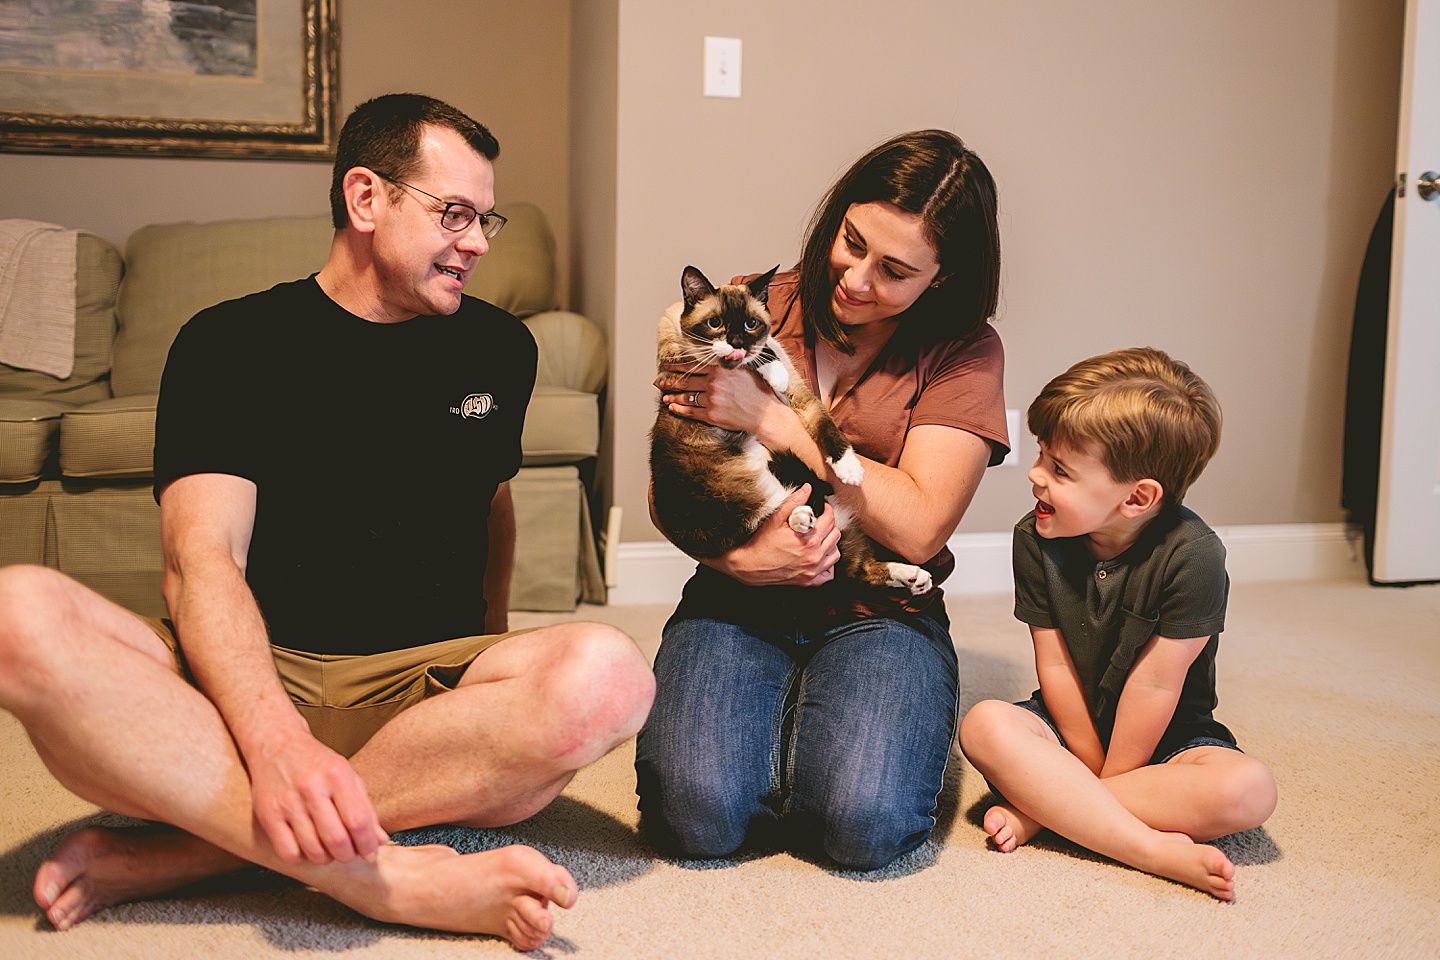 Family cat comes out of hiding for a few family pictures